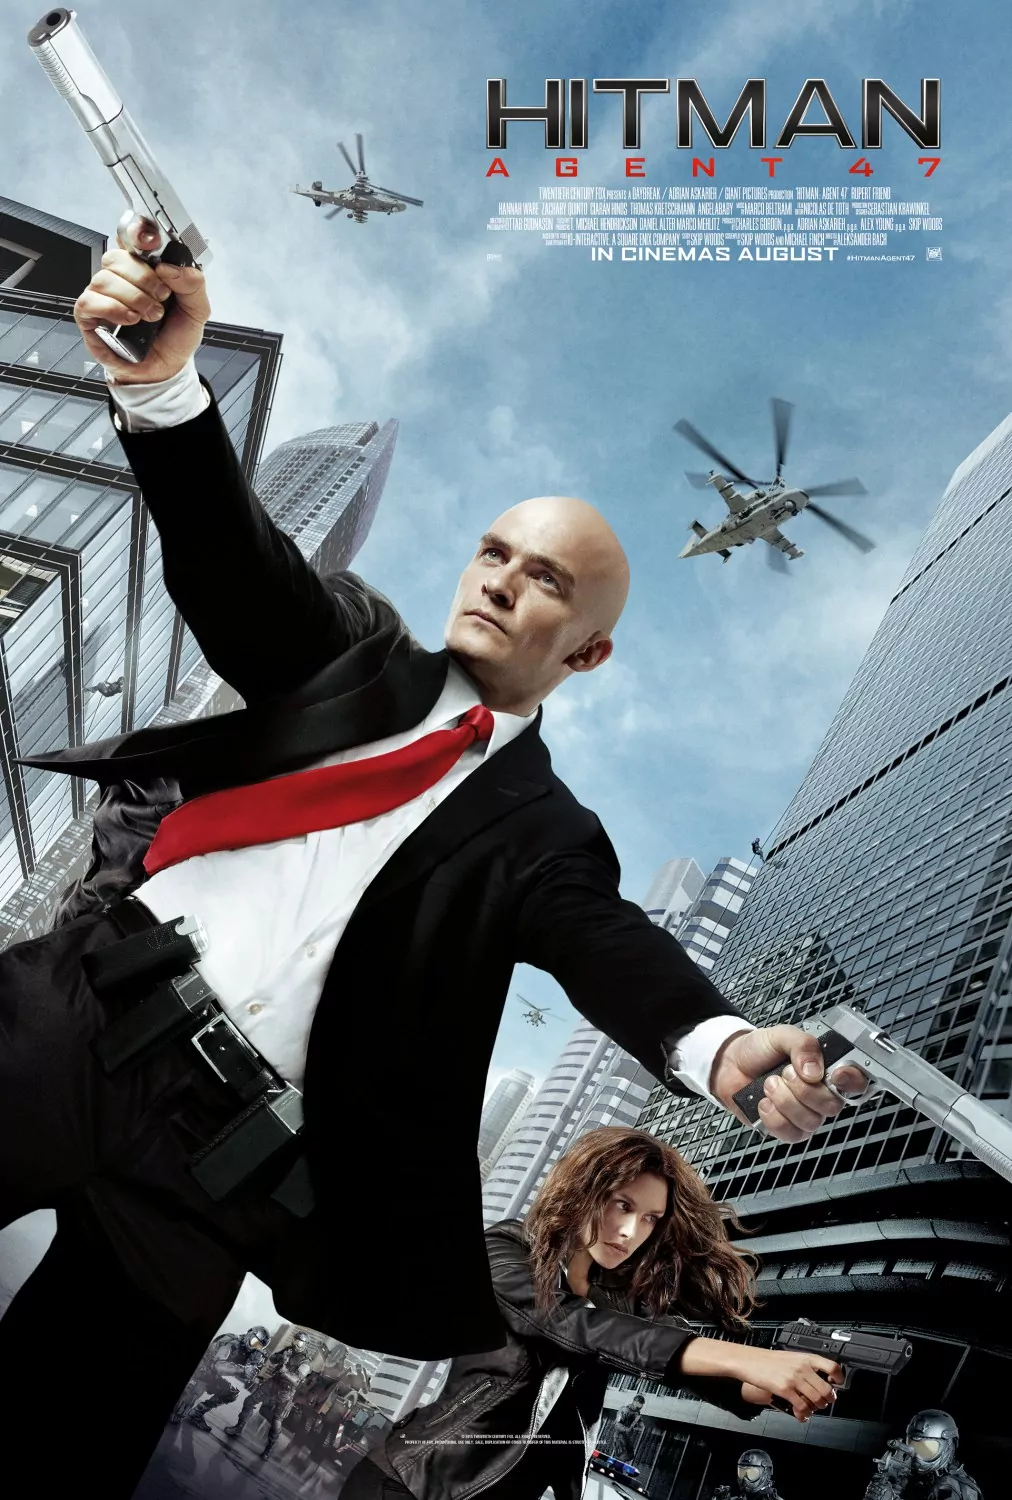 ‘HITMAN: AGENT 47’ VIEW AND DOWNLOAD FOR FREE!